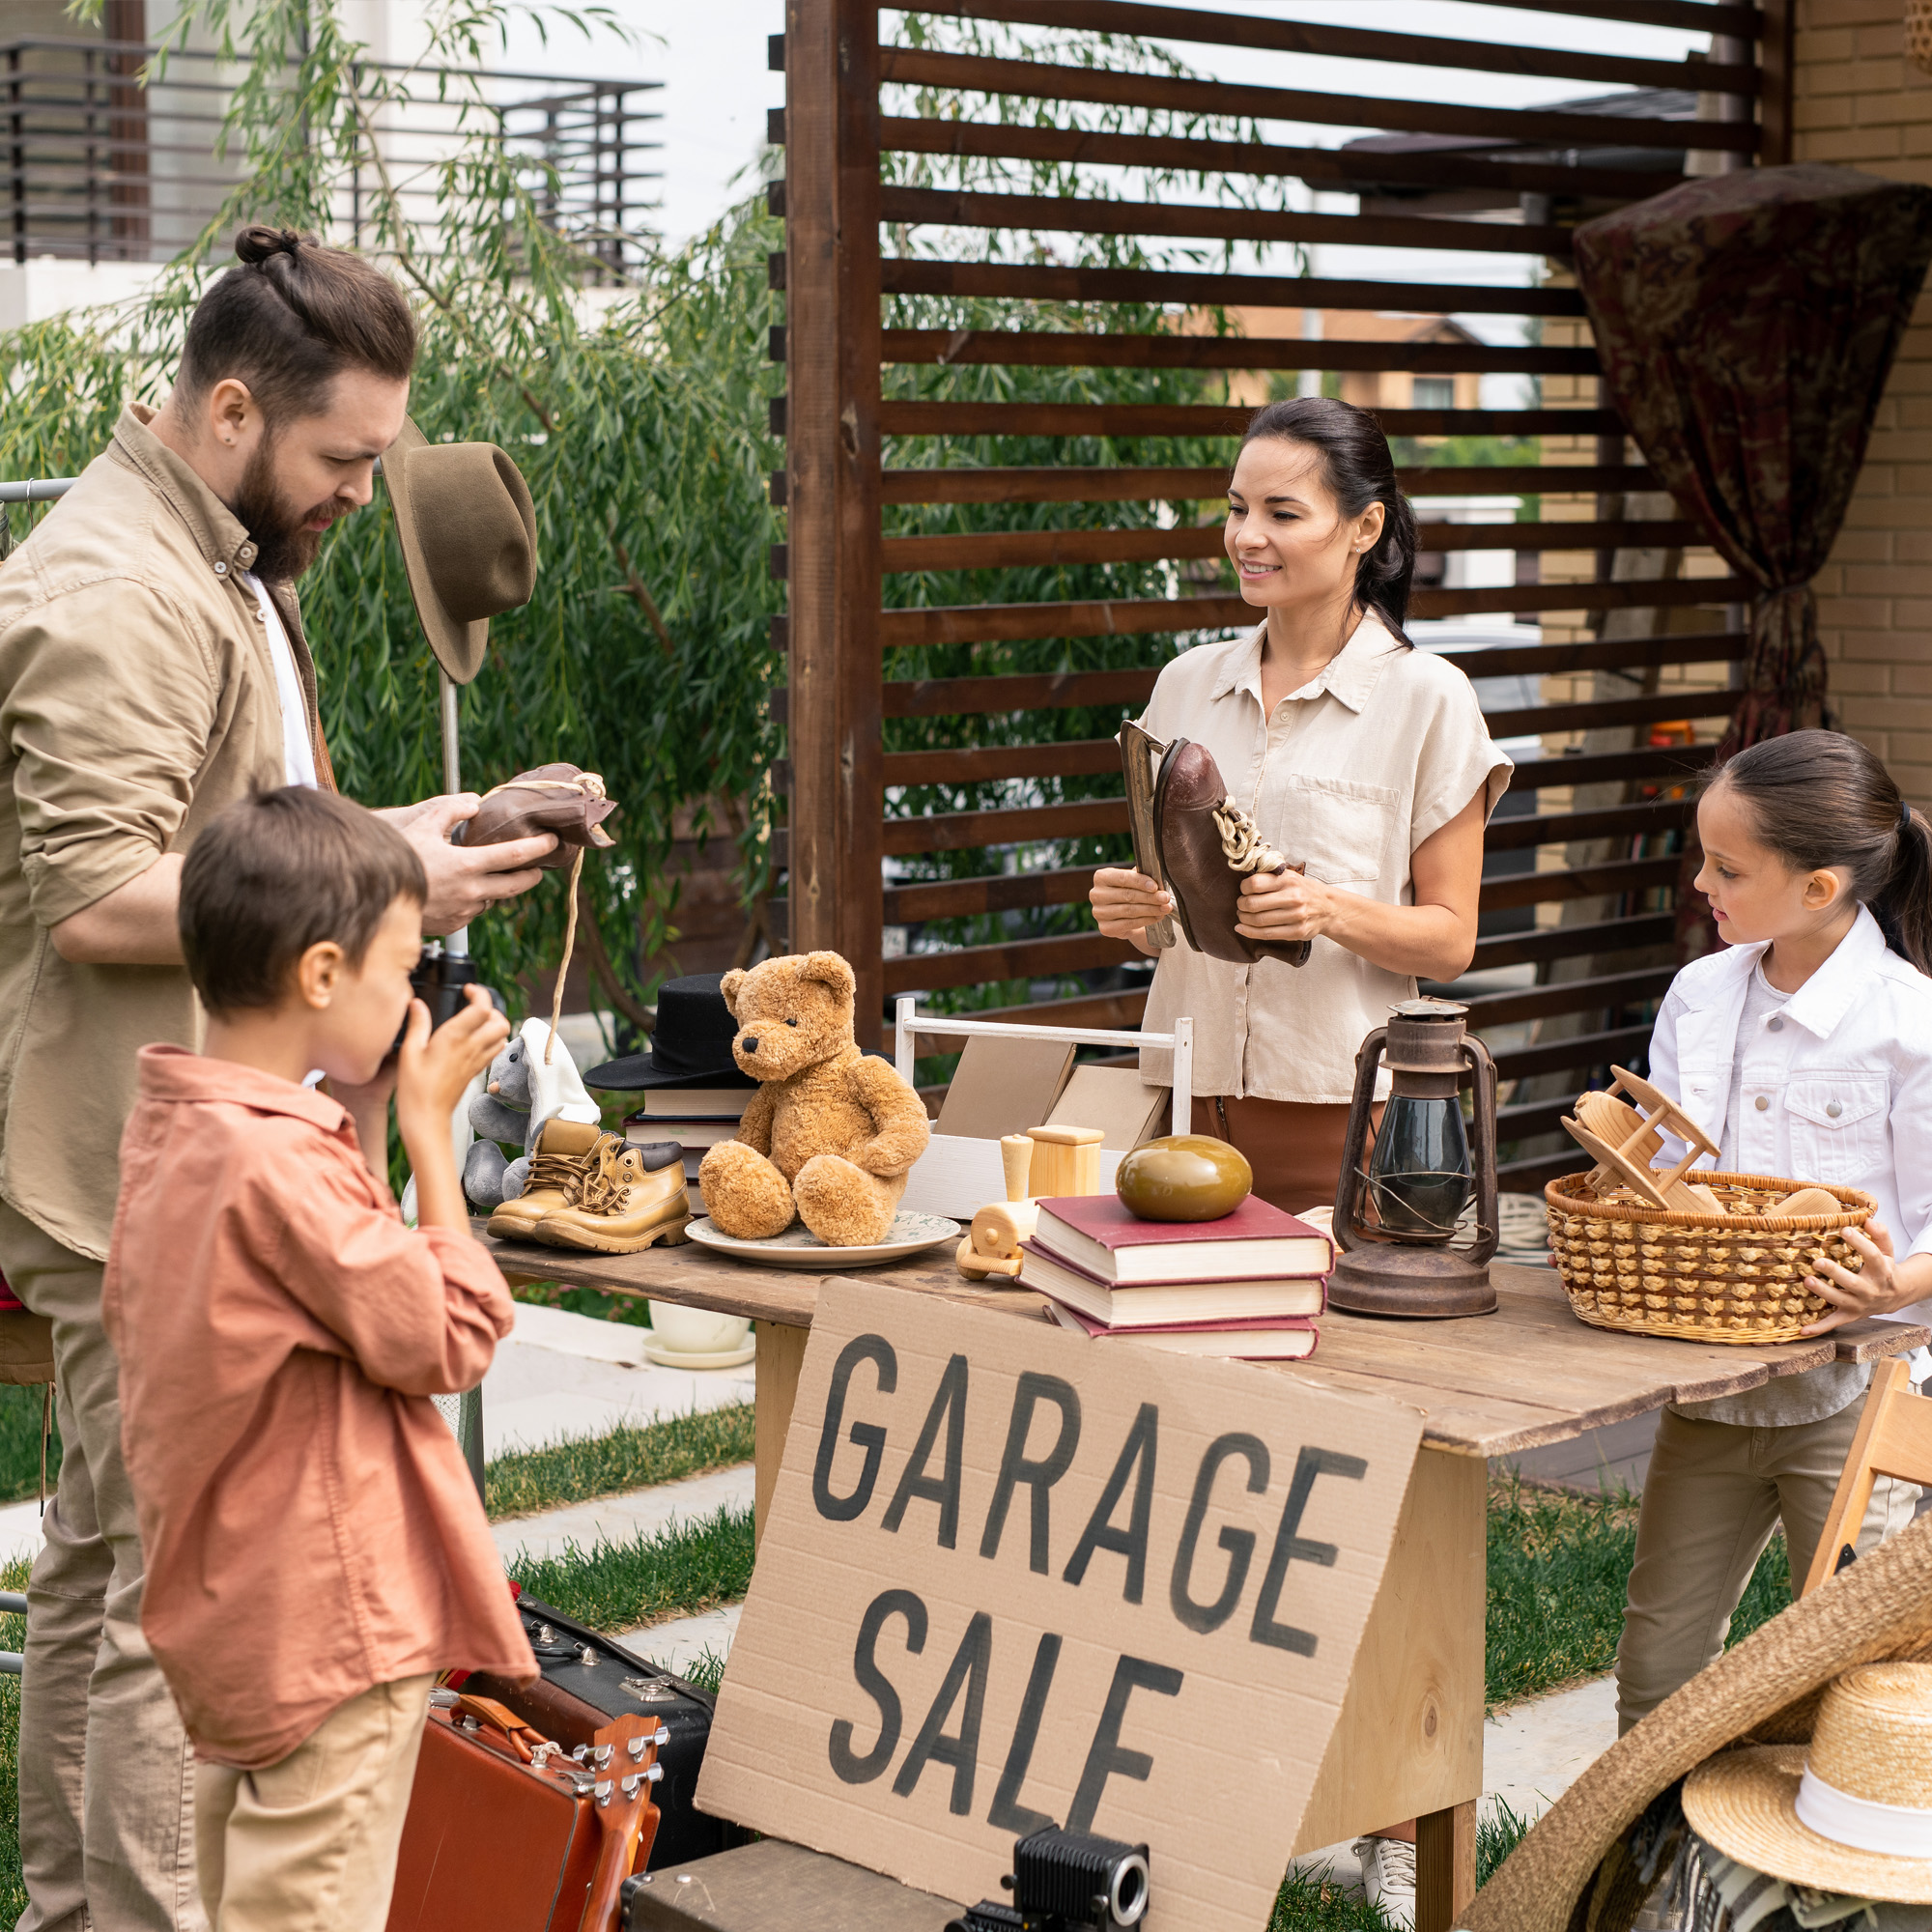 Keeping your property safe during a garage sale